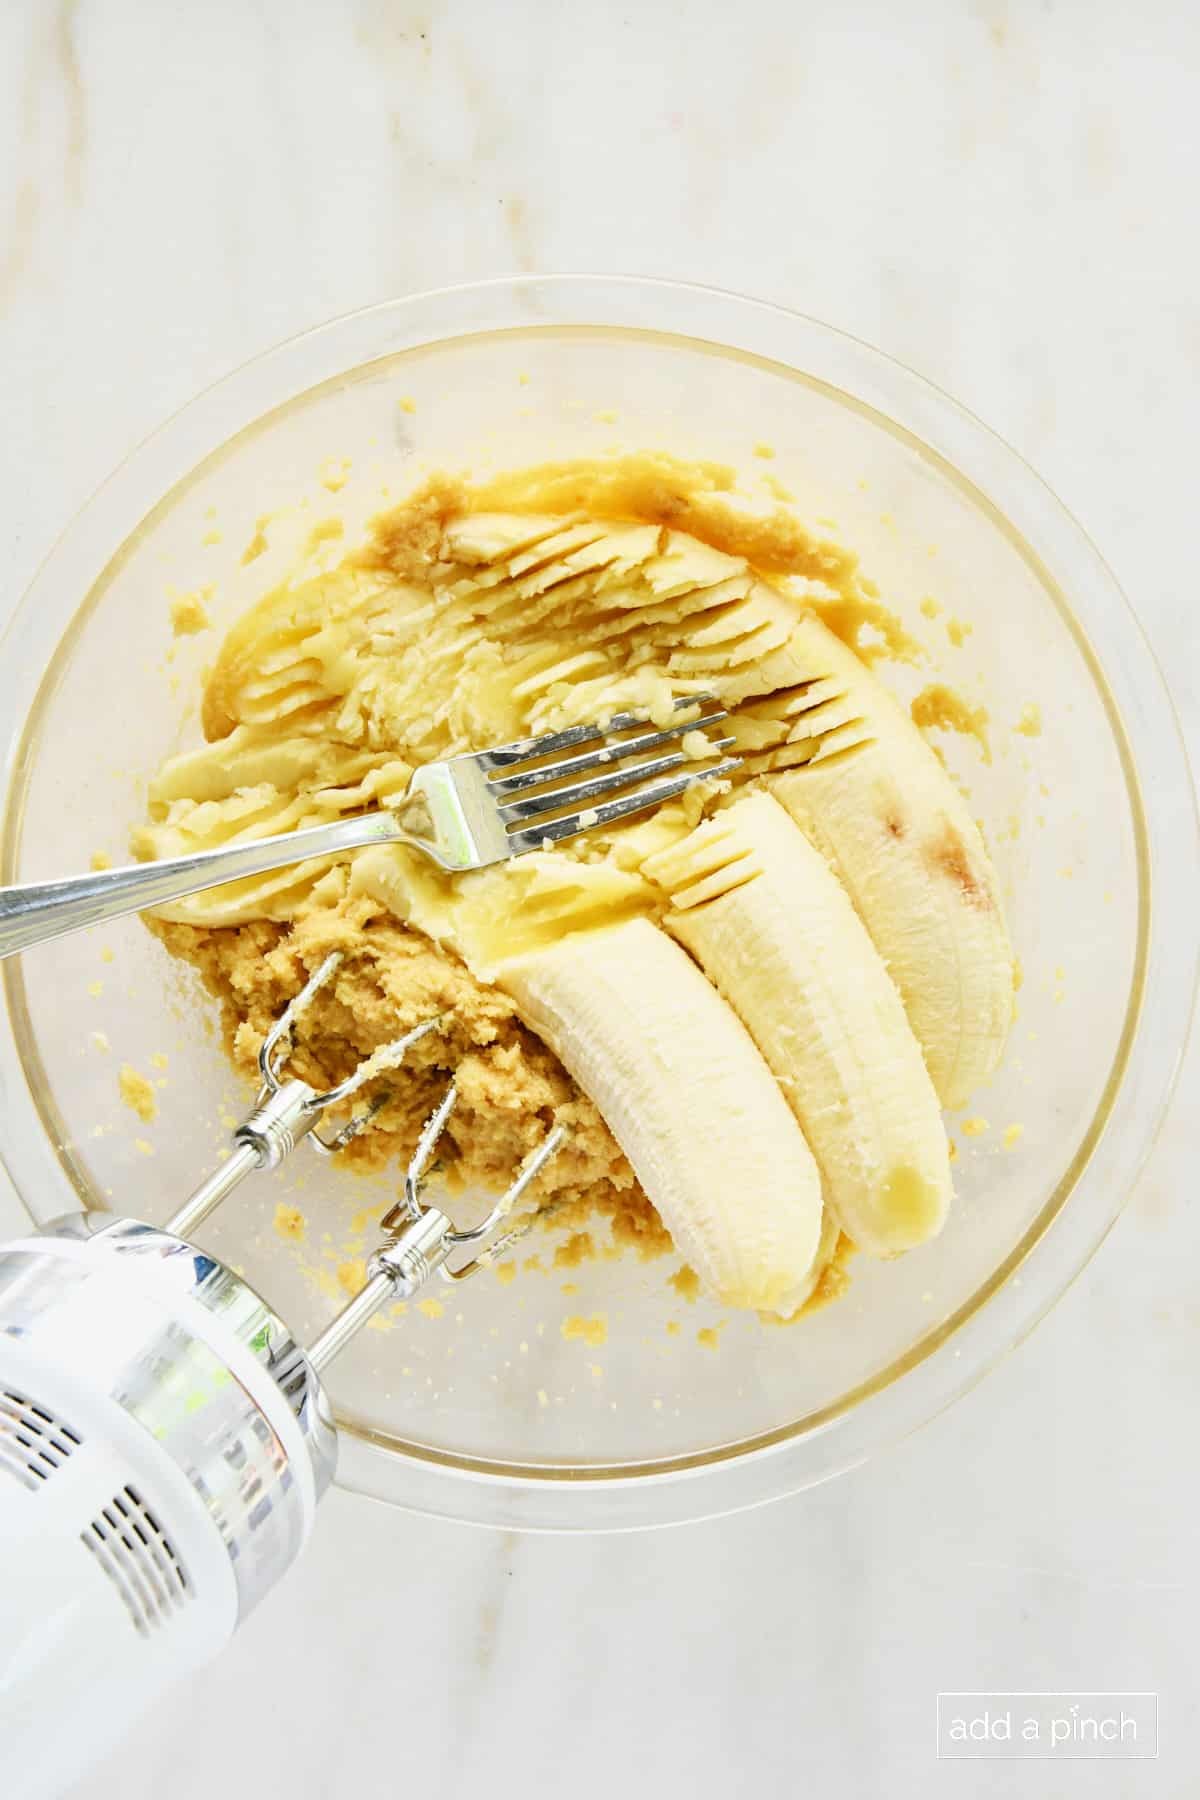 Bananas added to brown sugar and butter mashing with a fork in a glass bowl.